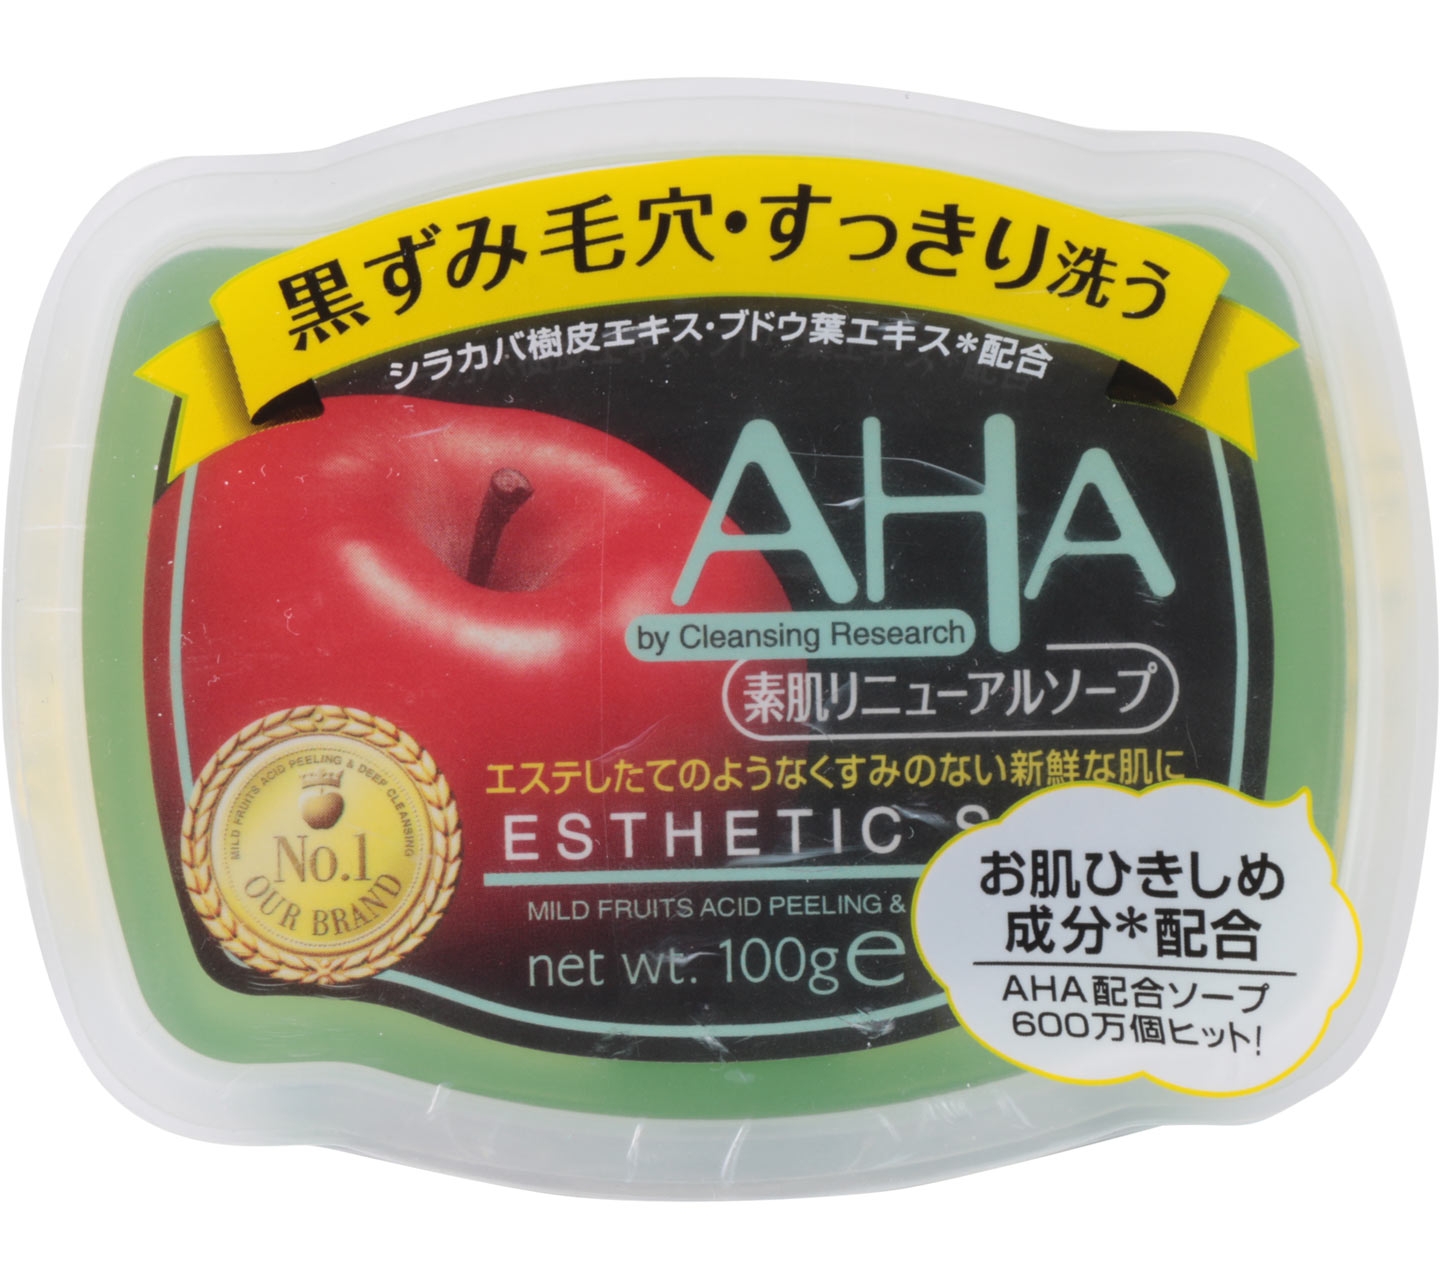 AHA Cleansing Research Esthetic Soap Skin Care